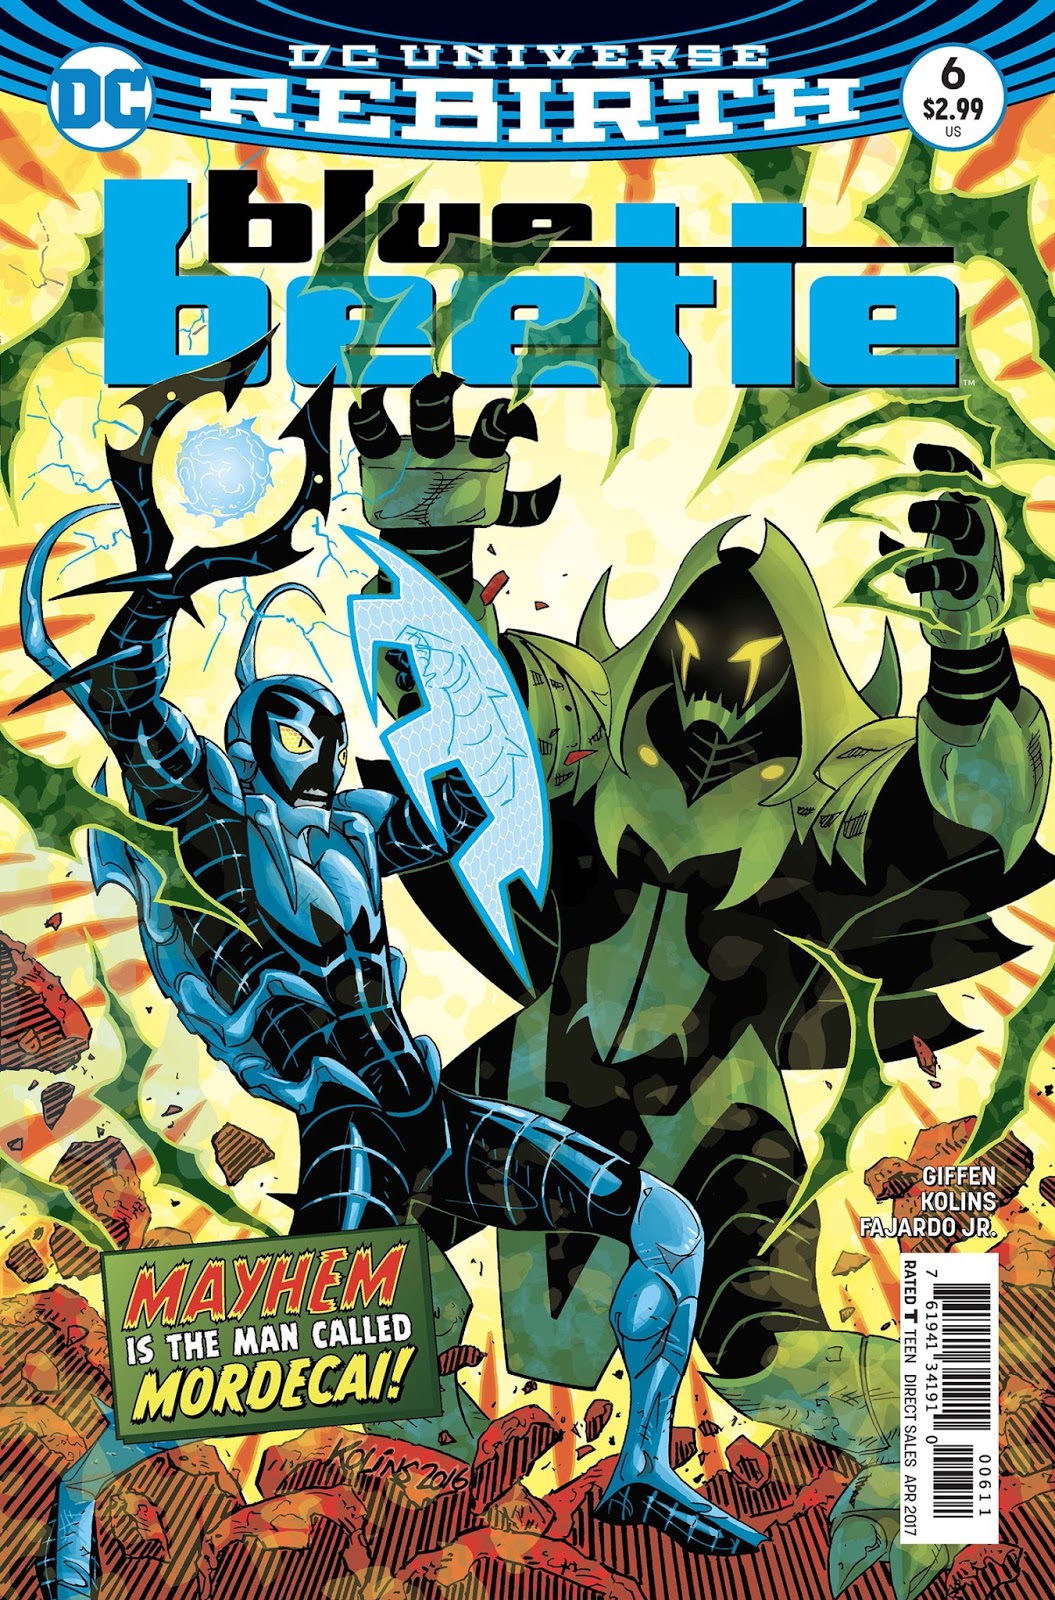 Weird Science DC Comics: Blue Beetle #6 Review and *SPOILERS*